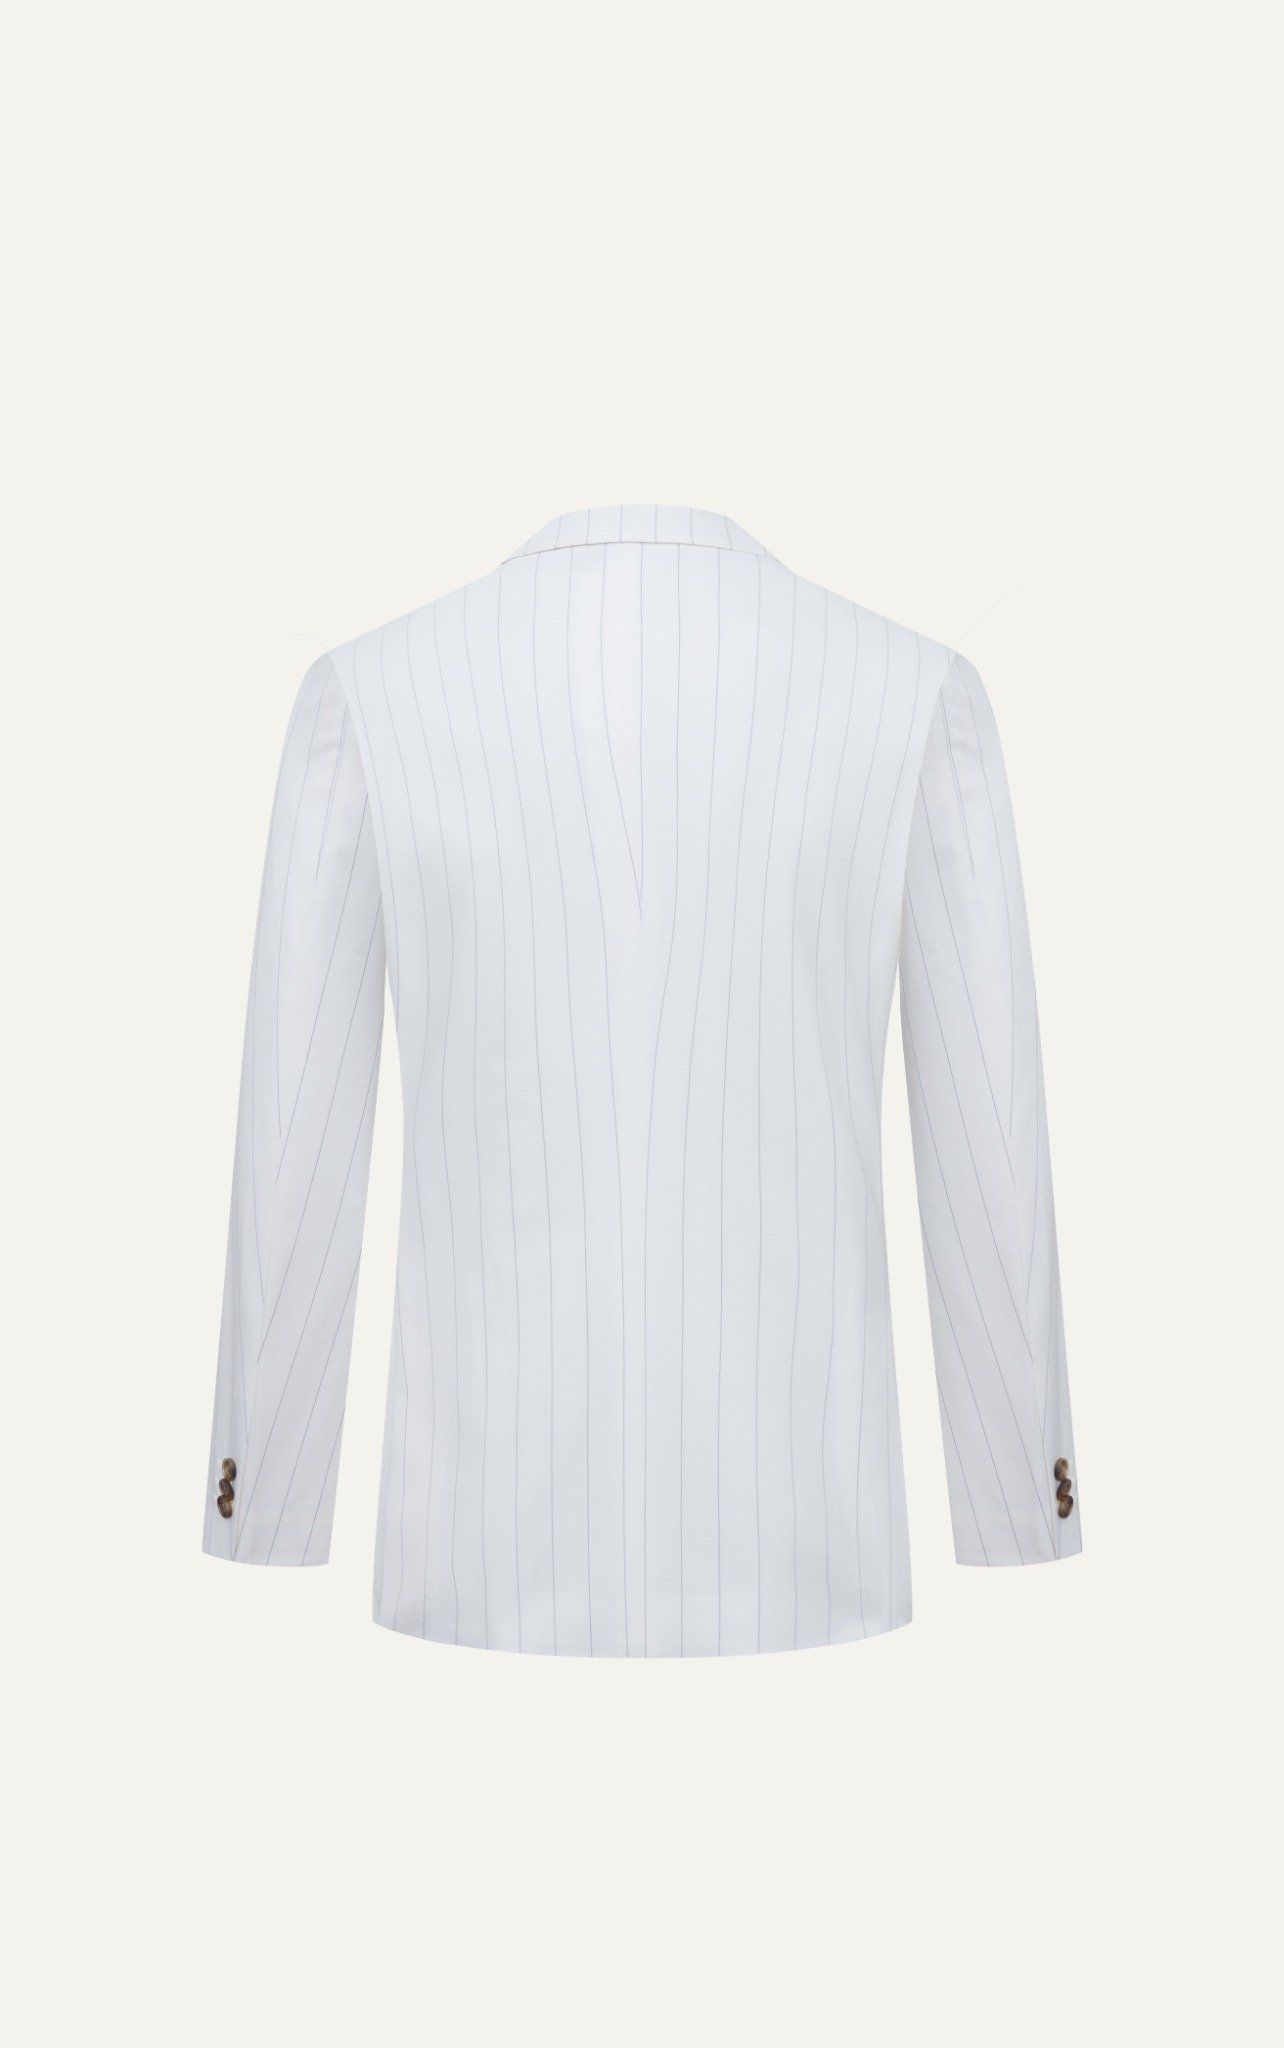 AG01 PREMIUM REGULAR FIT DOUBLE STRIPED BREASTED VEST - WHITE